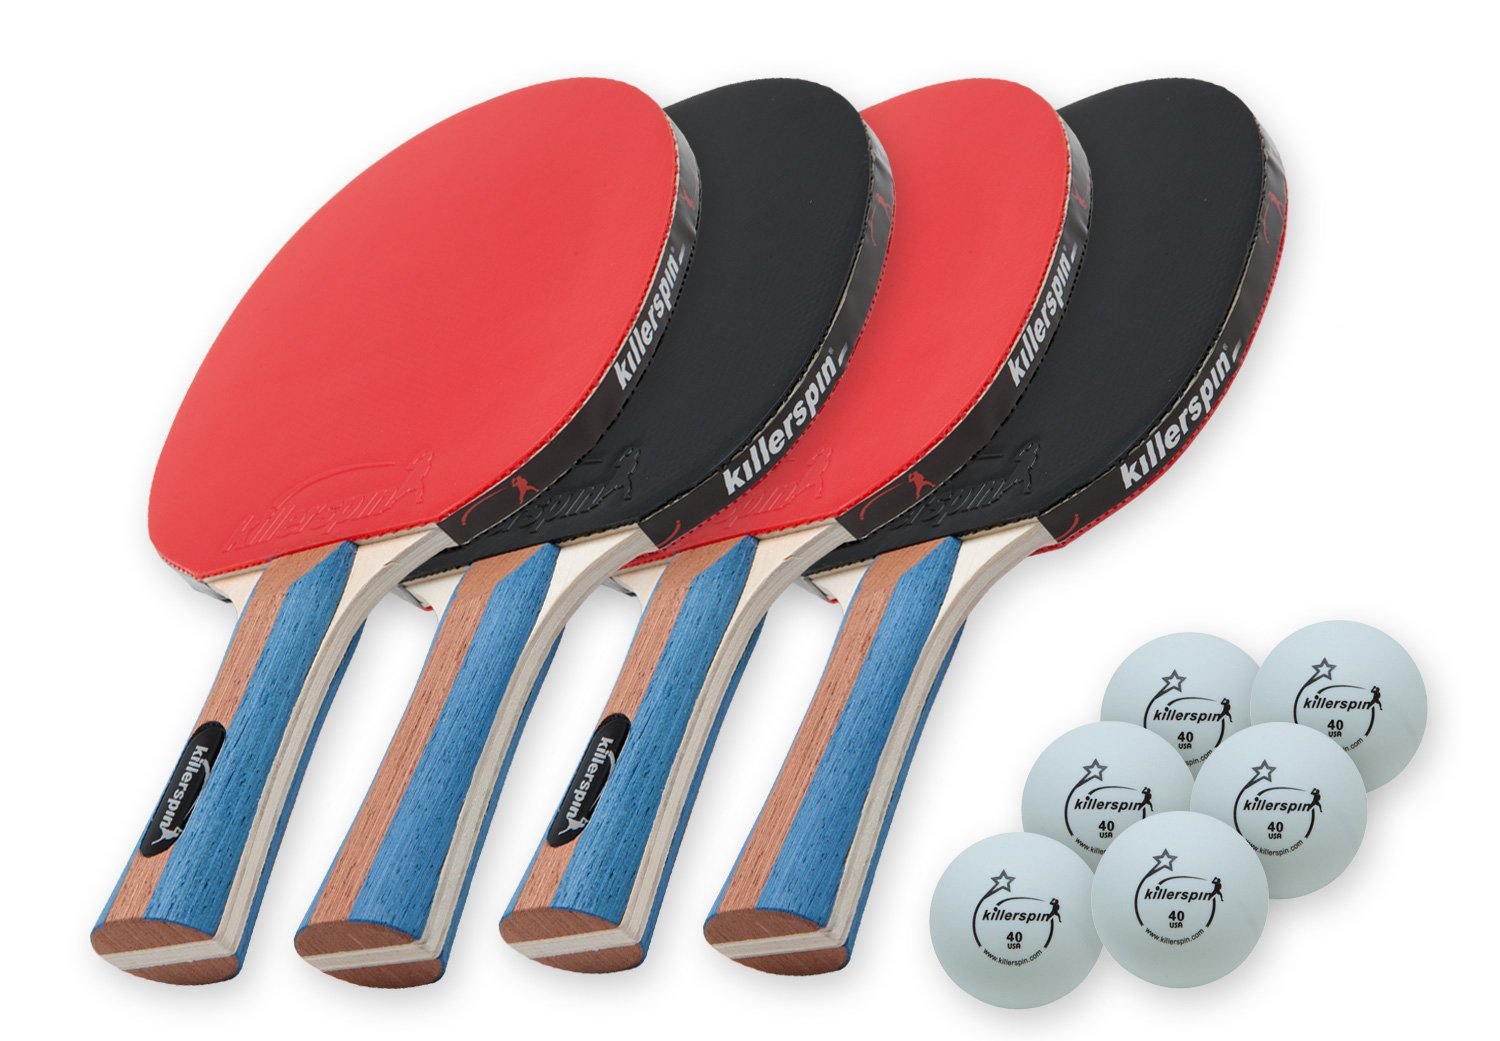 Cadrim Ping Pong Paddle Set Table Tennis Paddles Set Portable with Extendable Net 2 Bats Ping Pong Paddles 3 Table Tennis Balls Portable Game Storage Case Racket Bat Set Pingpong Indoor Outdoor Play